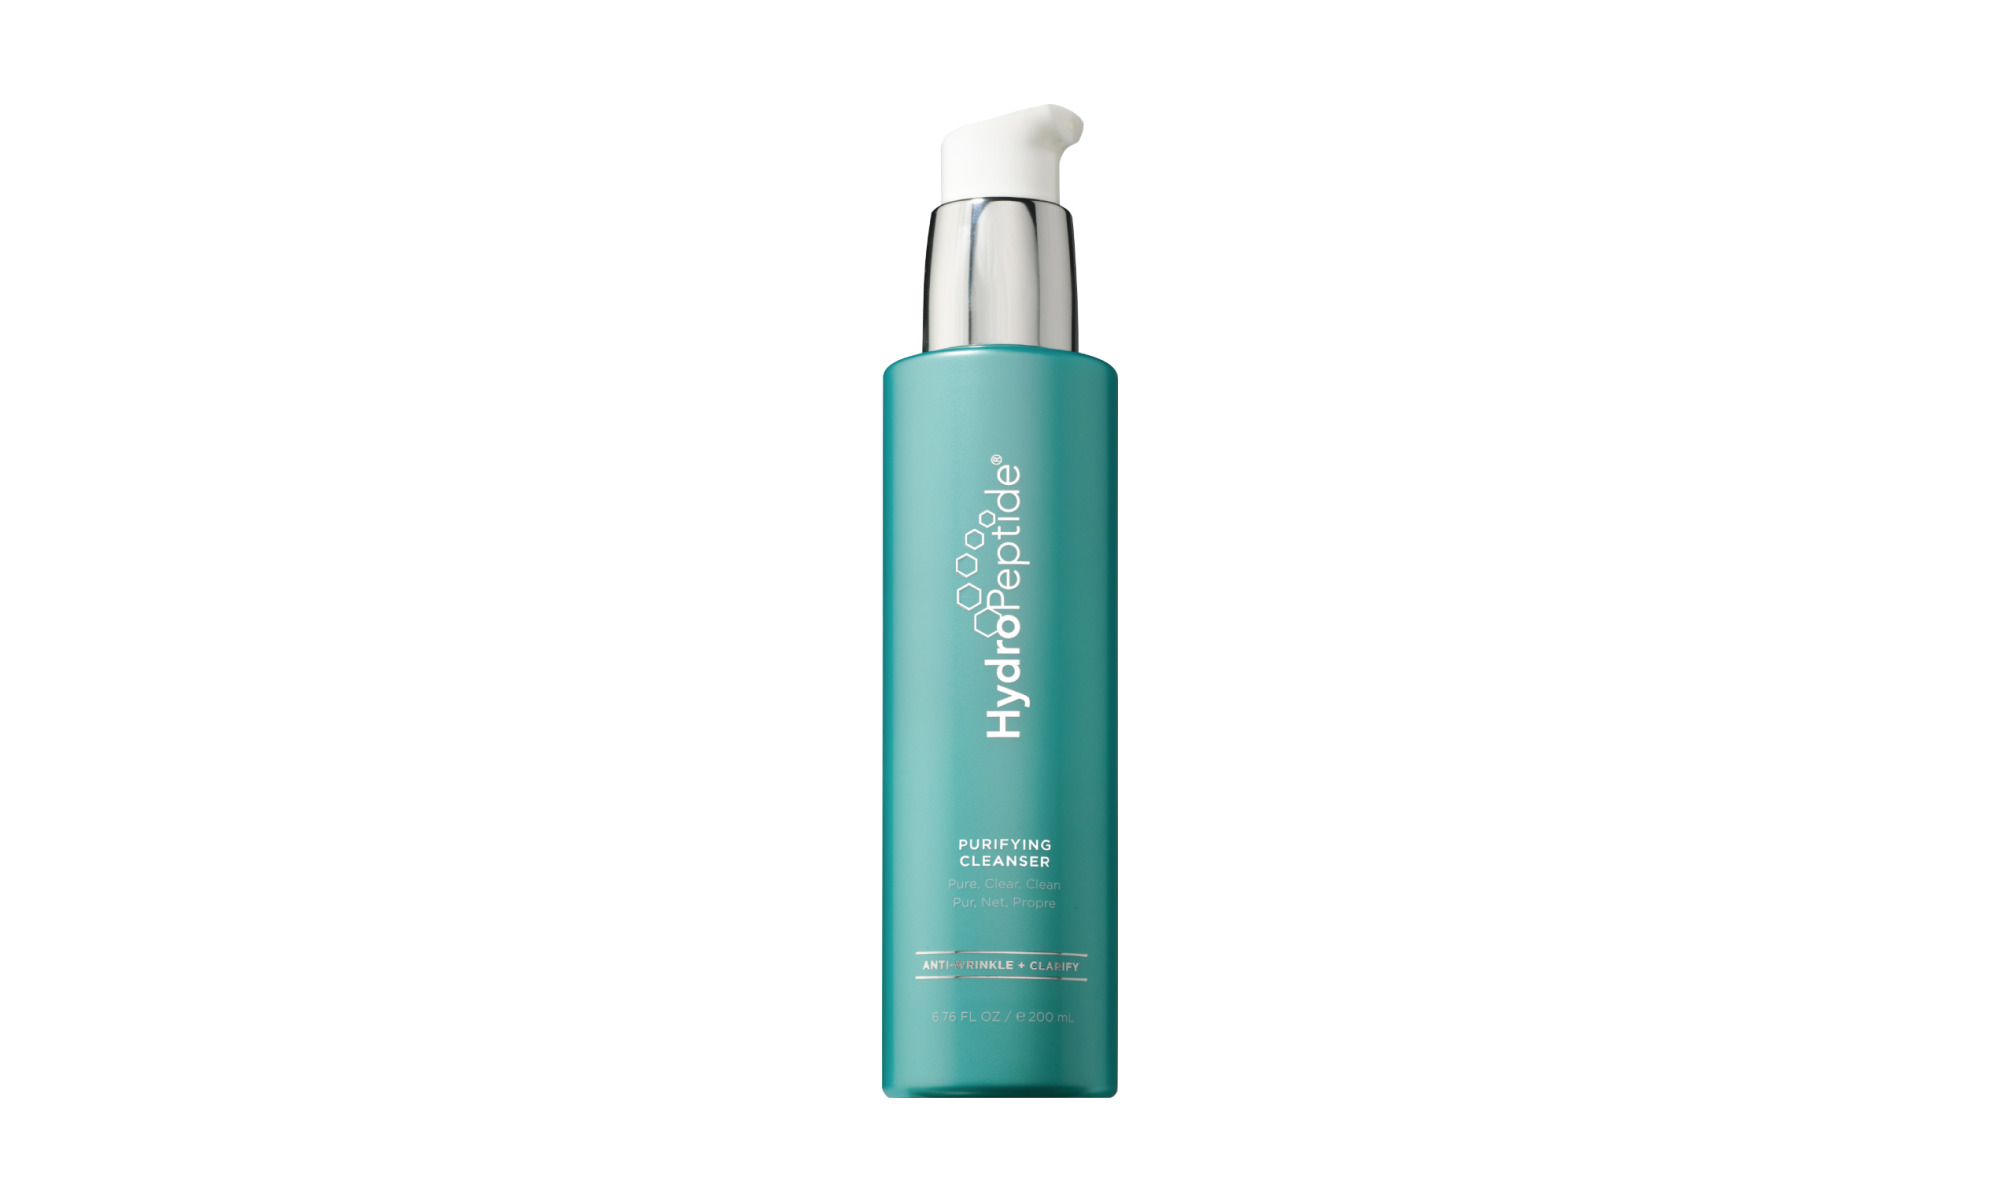 Purifying cleansing gel. HYDROPEPTIDE Cleansing Gel. Purifying Cleanser HYDROPEPTIDE. HYDROPEPTIDE Cleansing Gel 355 мл. Exfoliating Cleanser HYDROPEPTIDE.